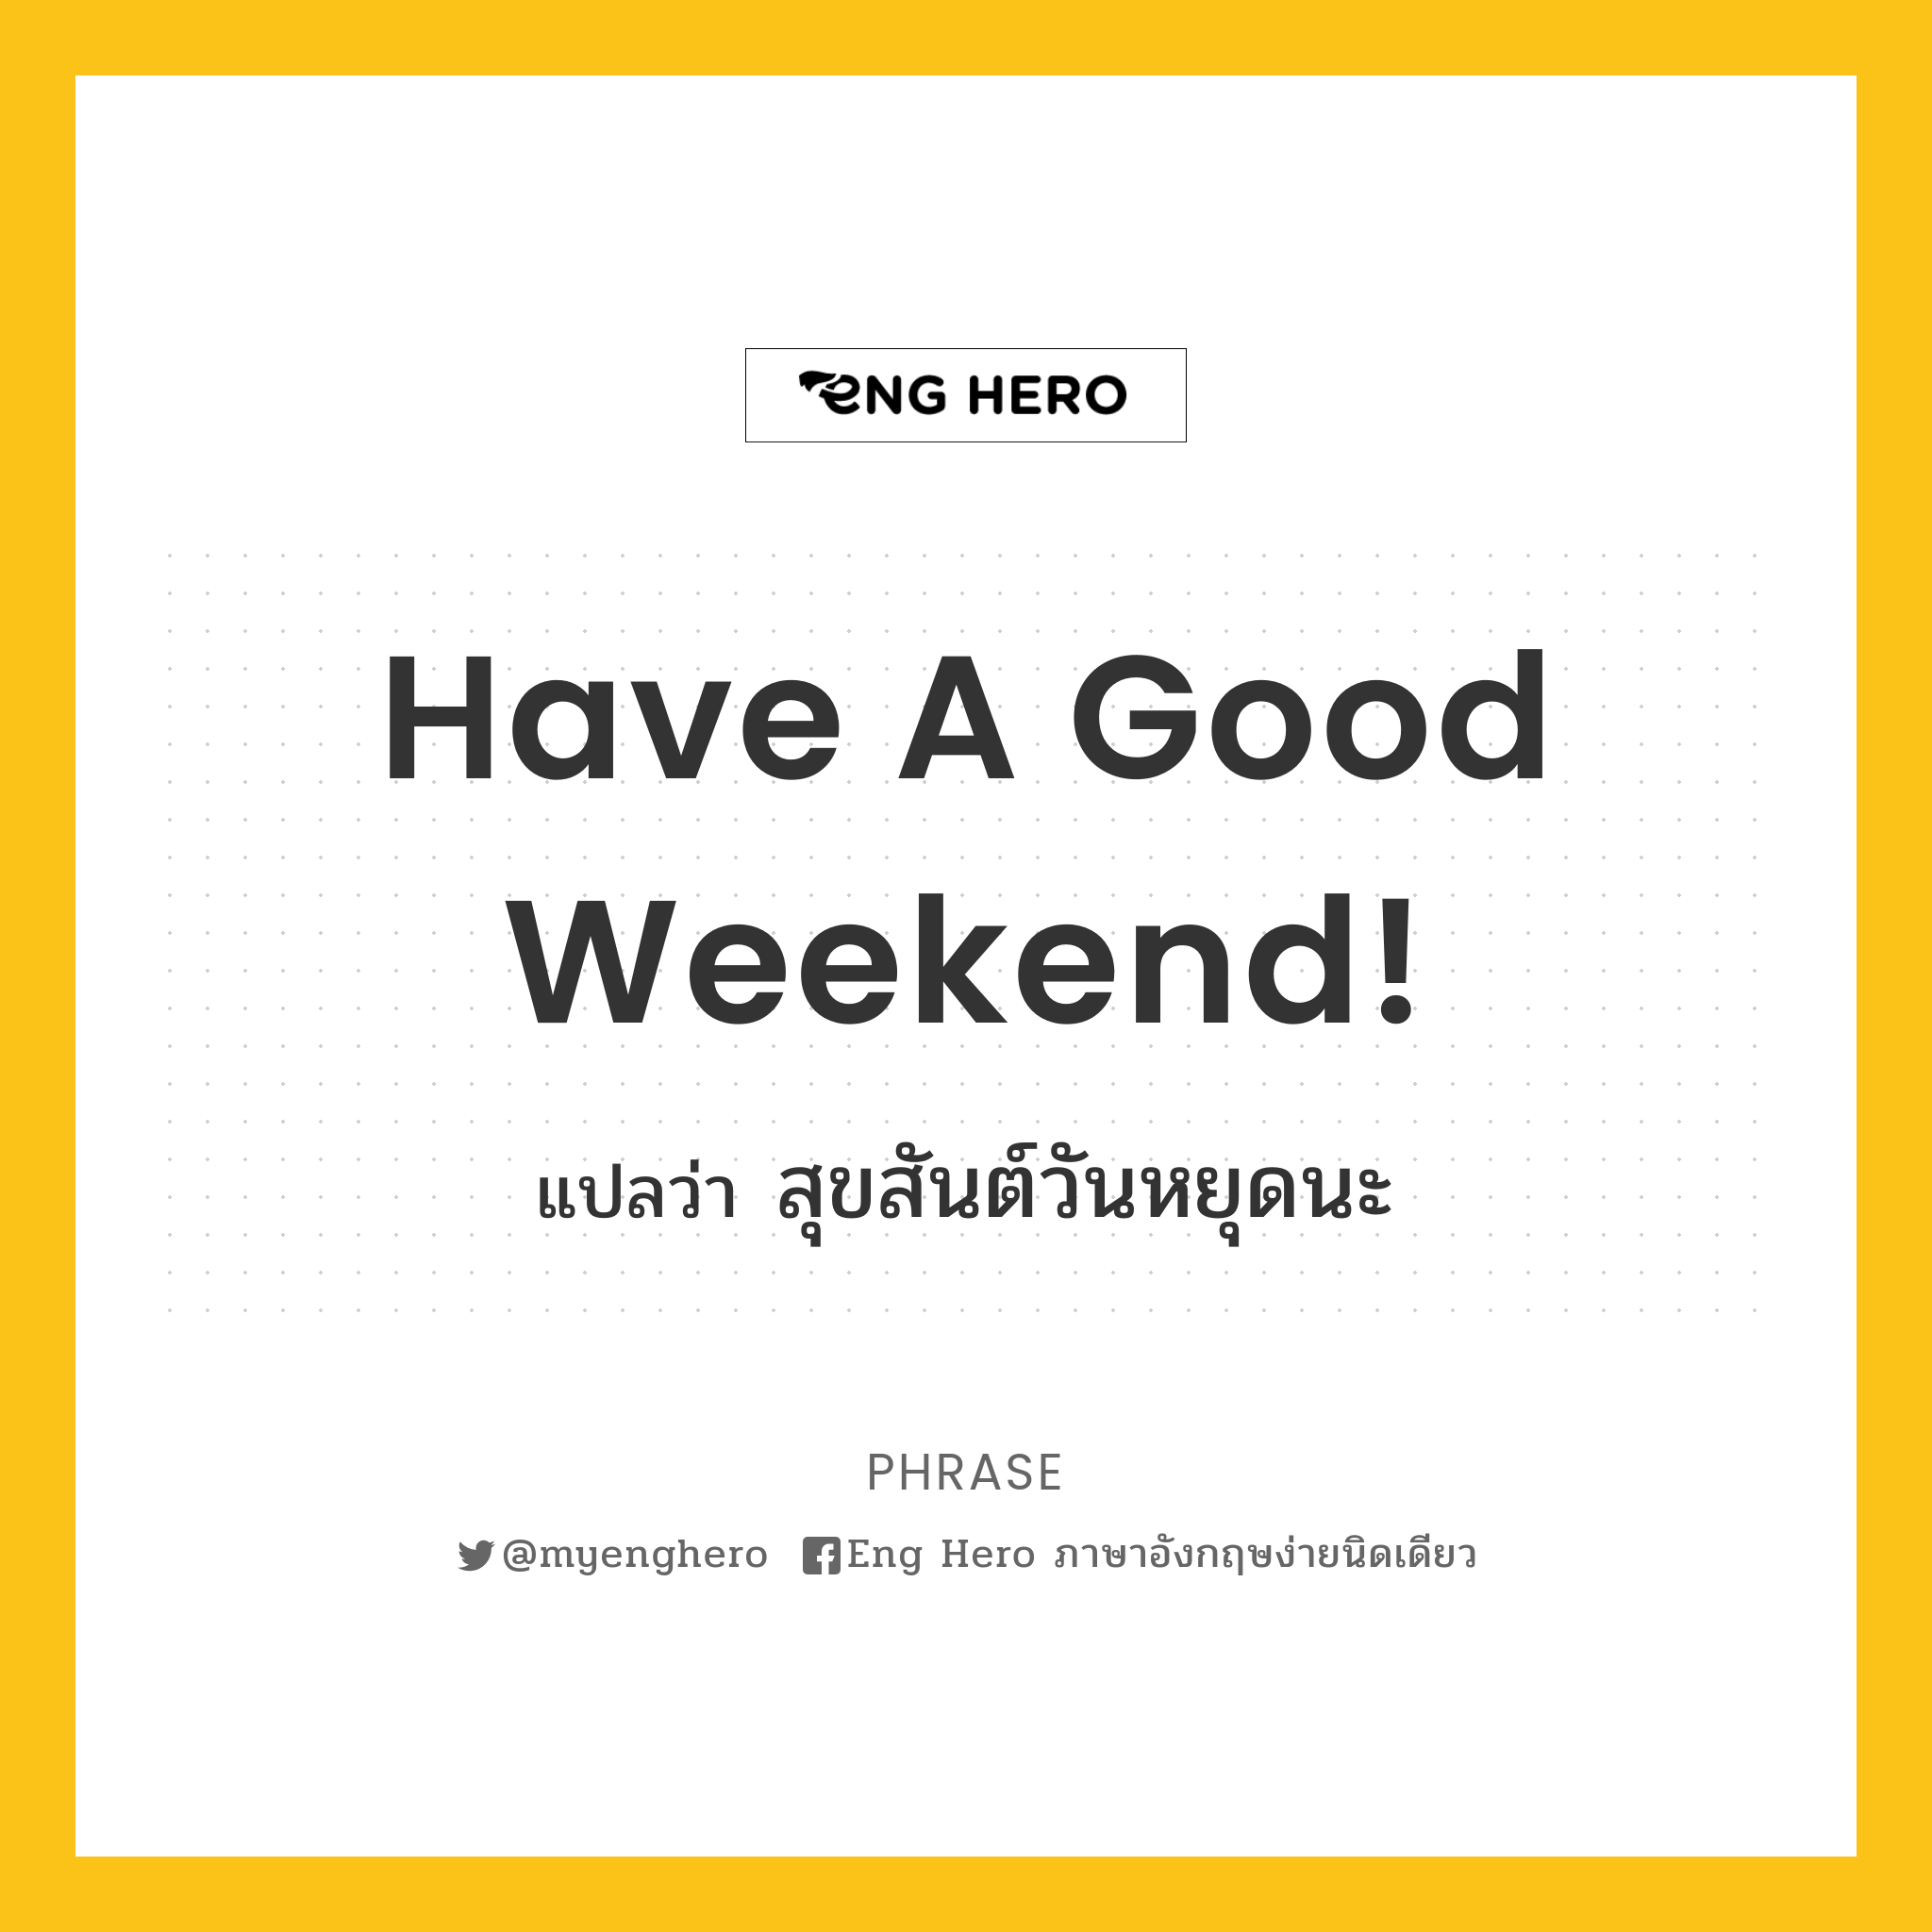 Have a good weekend!